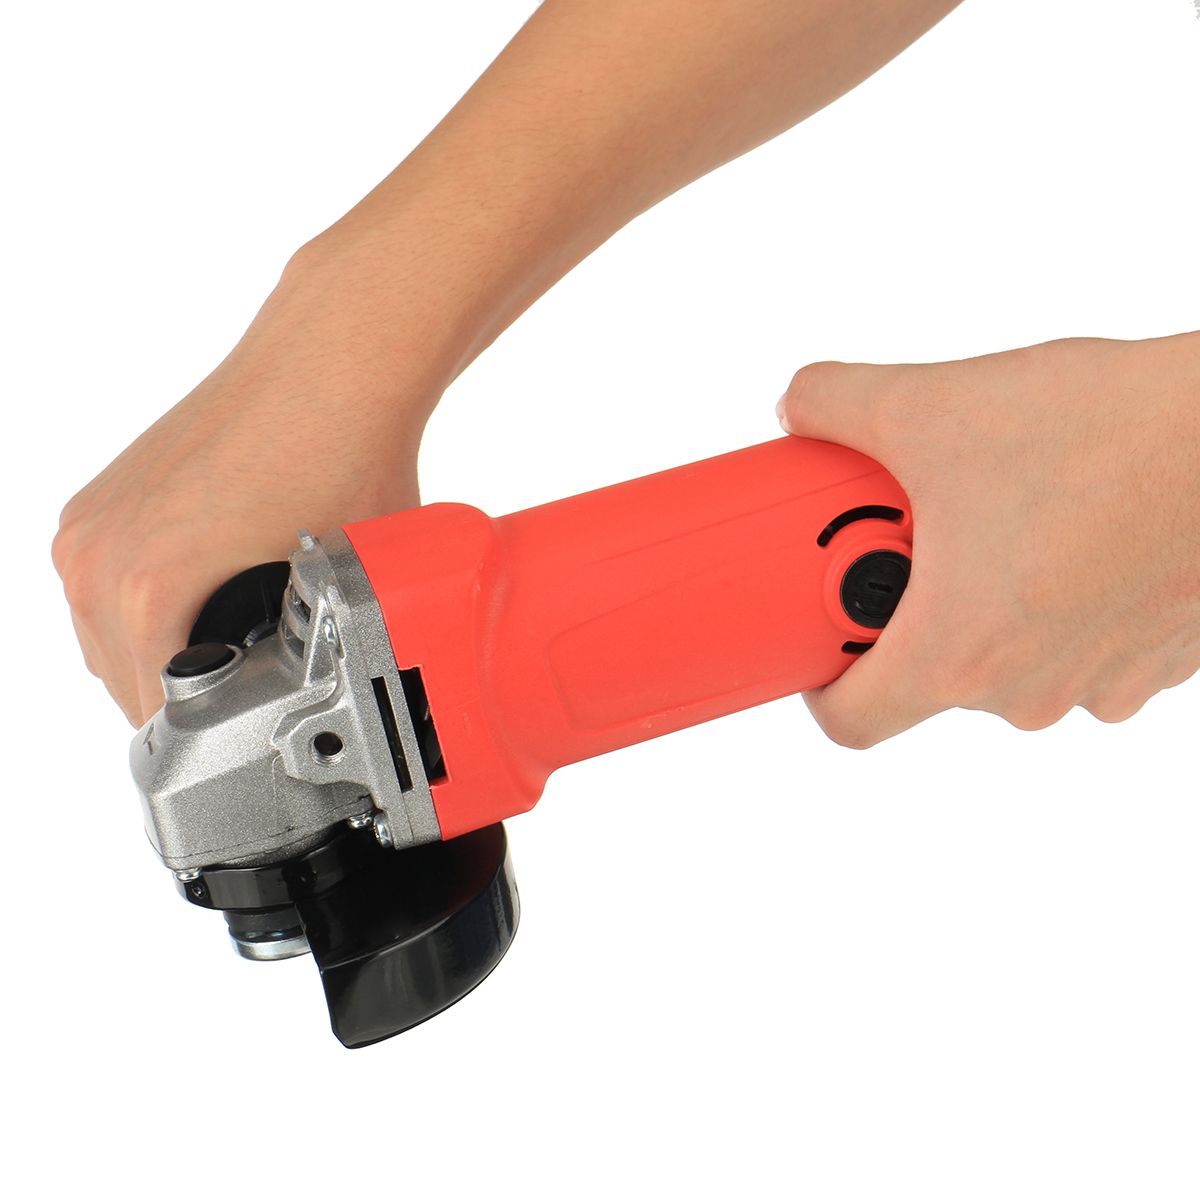 850W-100mm-11000rpm-Electric-Angle-Grinder-Cutting-Machine-Handheld-Polishing-Grinding-Carving-Tool-1736781